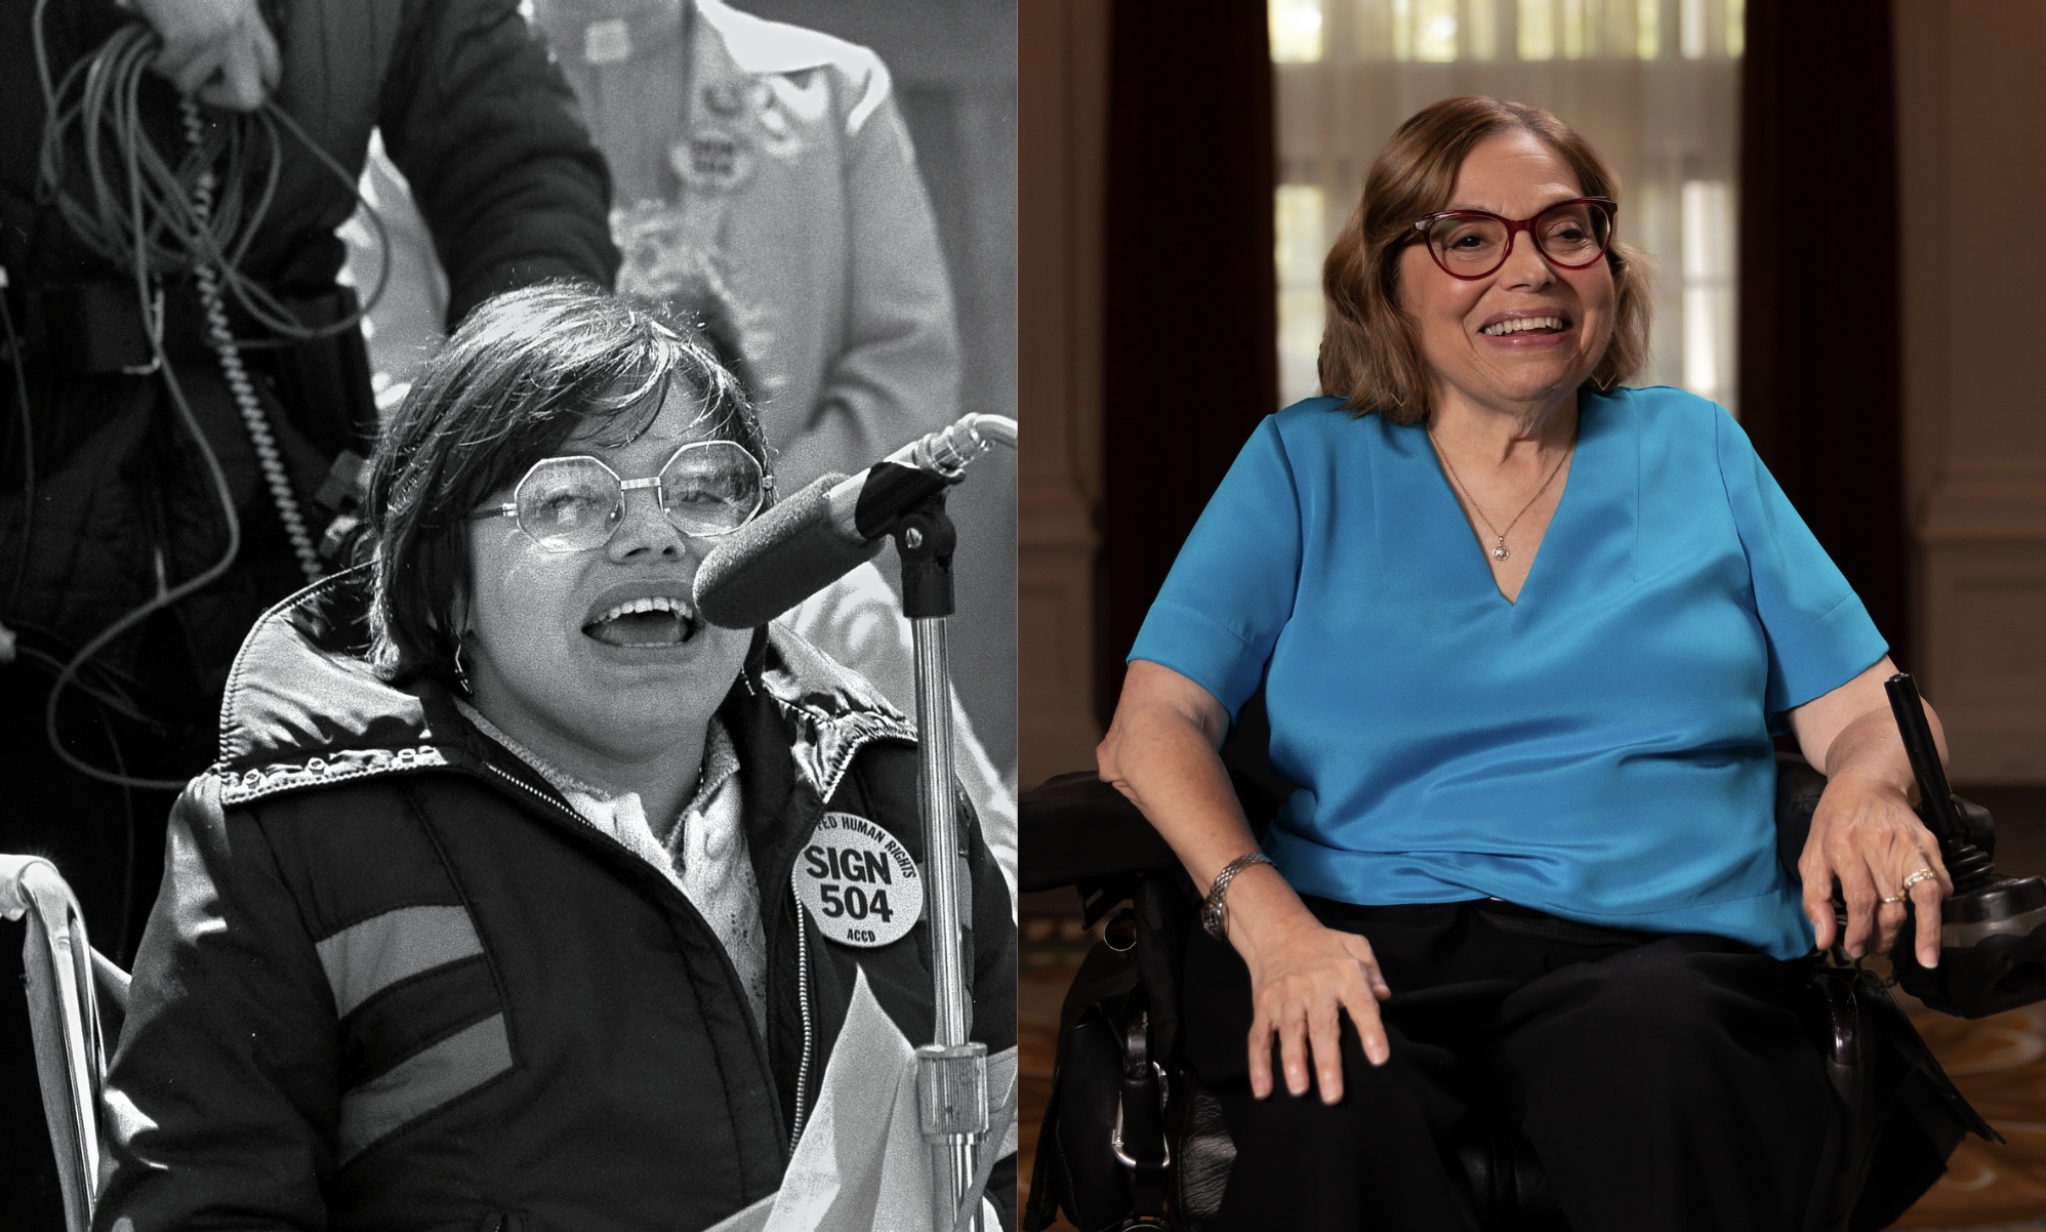 A collage of two photos of Judy Heumann. To the left; A black and white photo of Judy Heumann at the 504 protests in the 70s. Judy is a white woman with short brown hair who uses a wheelchair. She is wearing glasses and a jacket with a pin that says “Sign 504 Now” She is passionately speaking at a microphone. To the right; A headshot of Judy Heumann, a white woman with shoulder-length brown hair wearing red glasses, a blue v-neck shirt, and a gold necklace. She is smiling warmly.